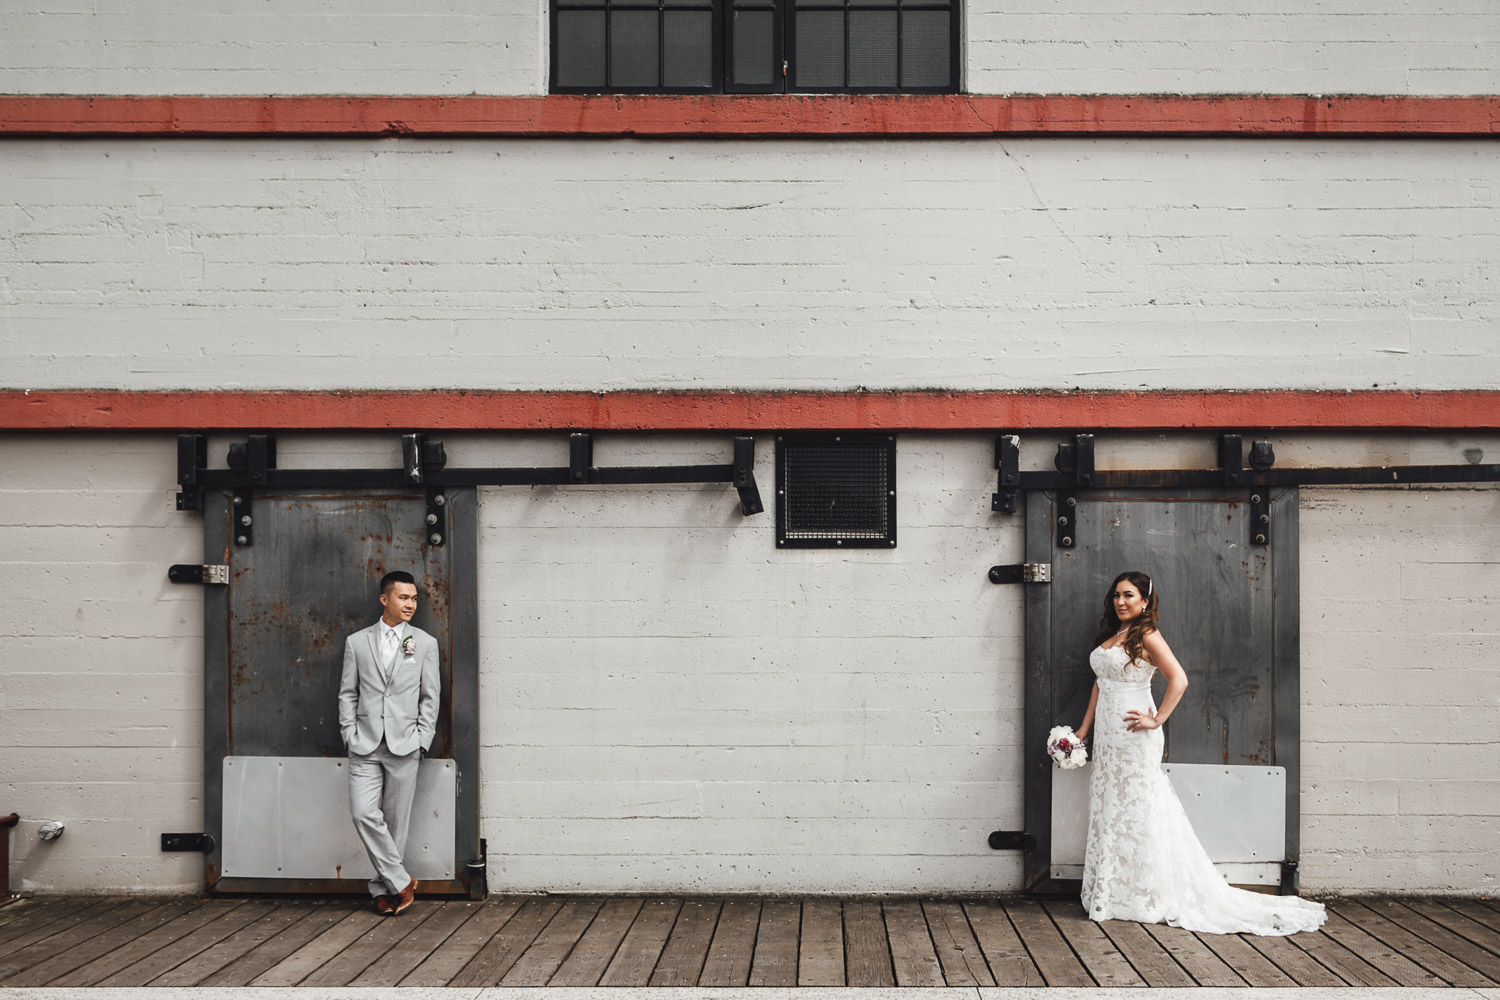 Londsdale pier in north vancouver wedding photography bride and groom